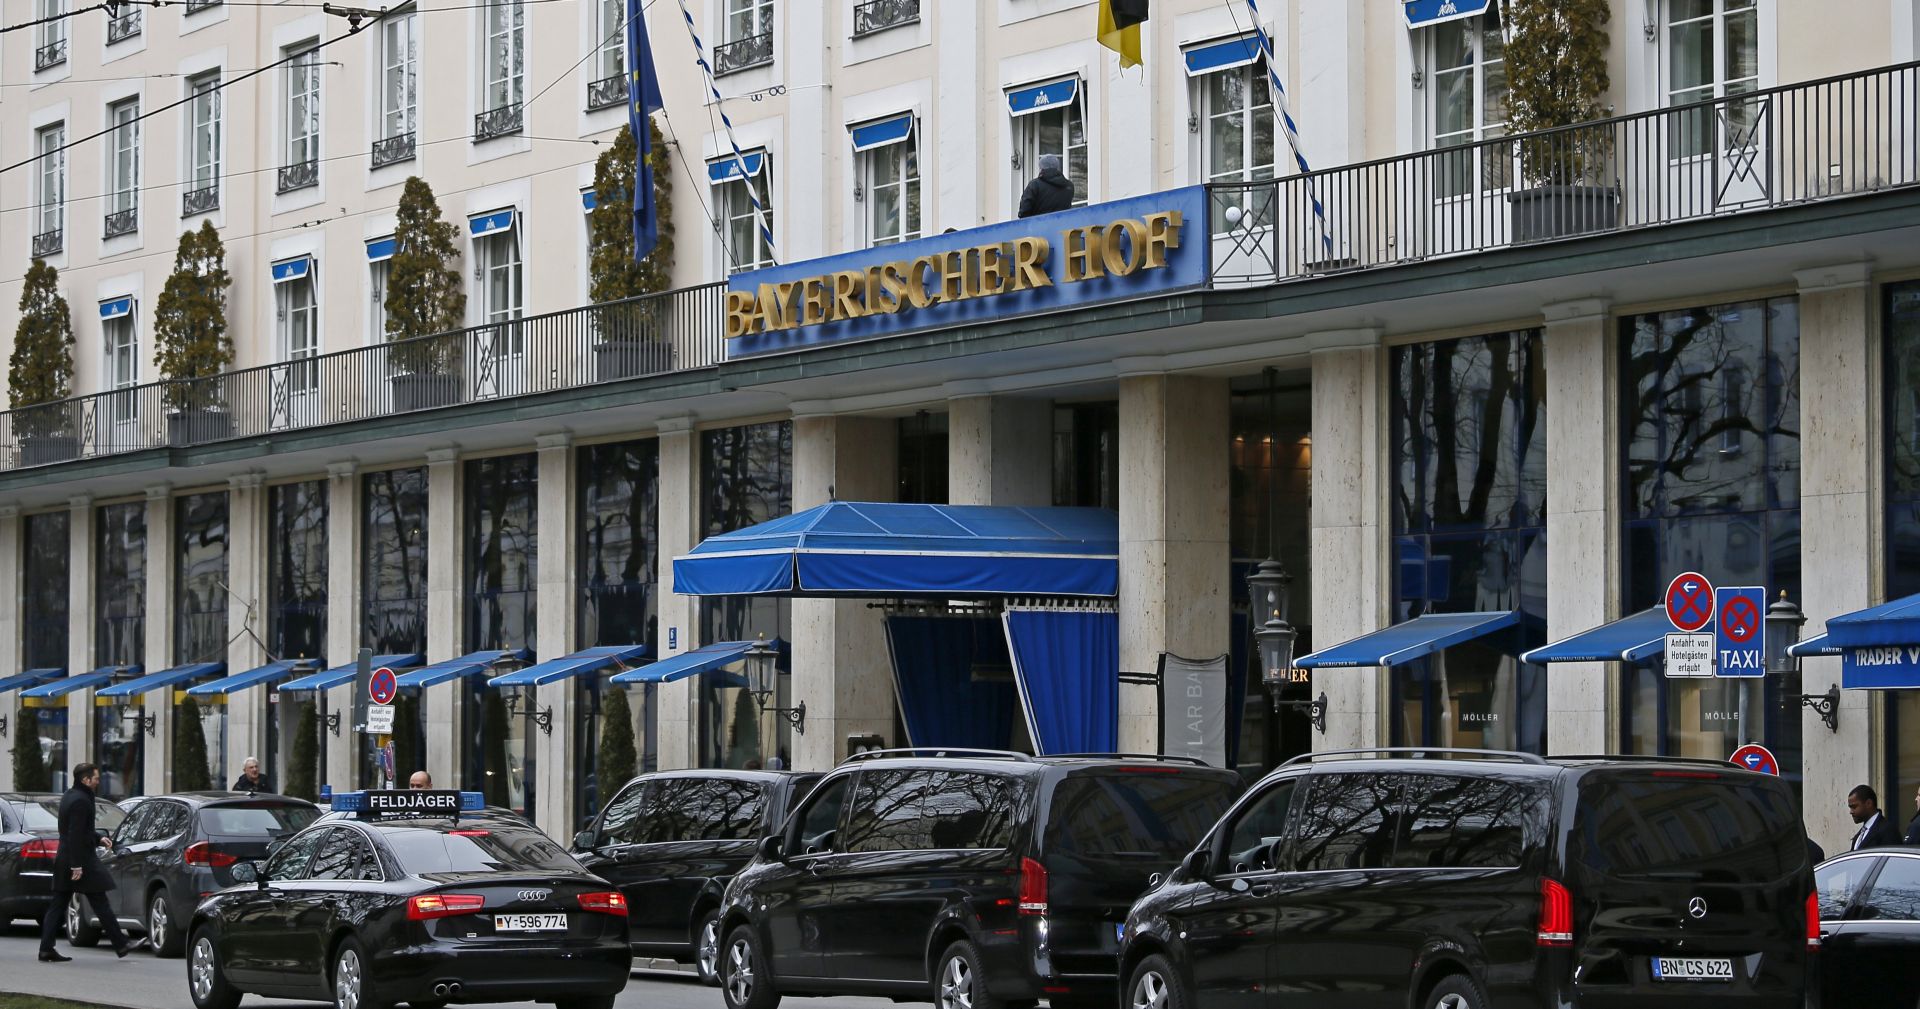 epa06528324 An exterior view of the 'Bayerischer Hof' hotel, the venue of the 54rd Munich Security Conference (MSC), in Munich, Germany, 15 February 2018. In their annual meeting, politicians and various experts and guests from around the world discuss global security topics from 16 to 18 February.  EPA/RONALD WITTEK